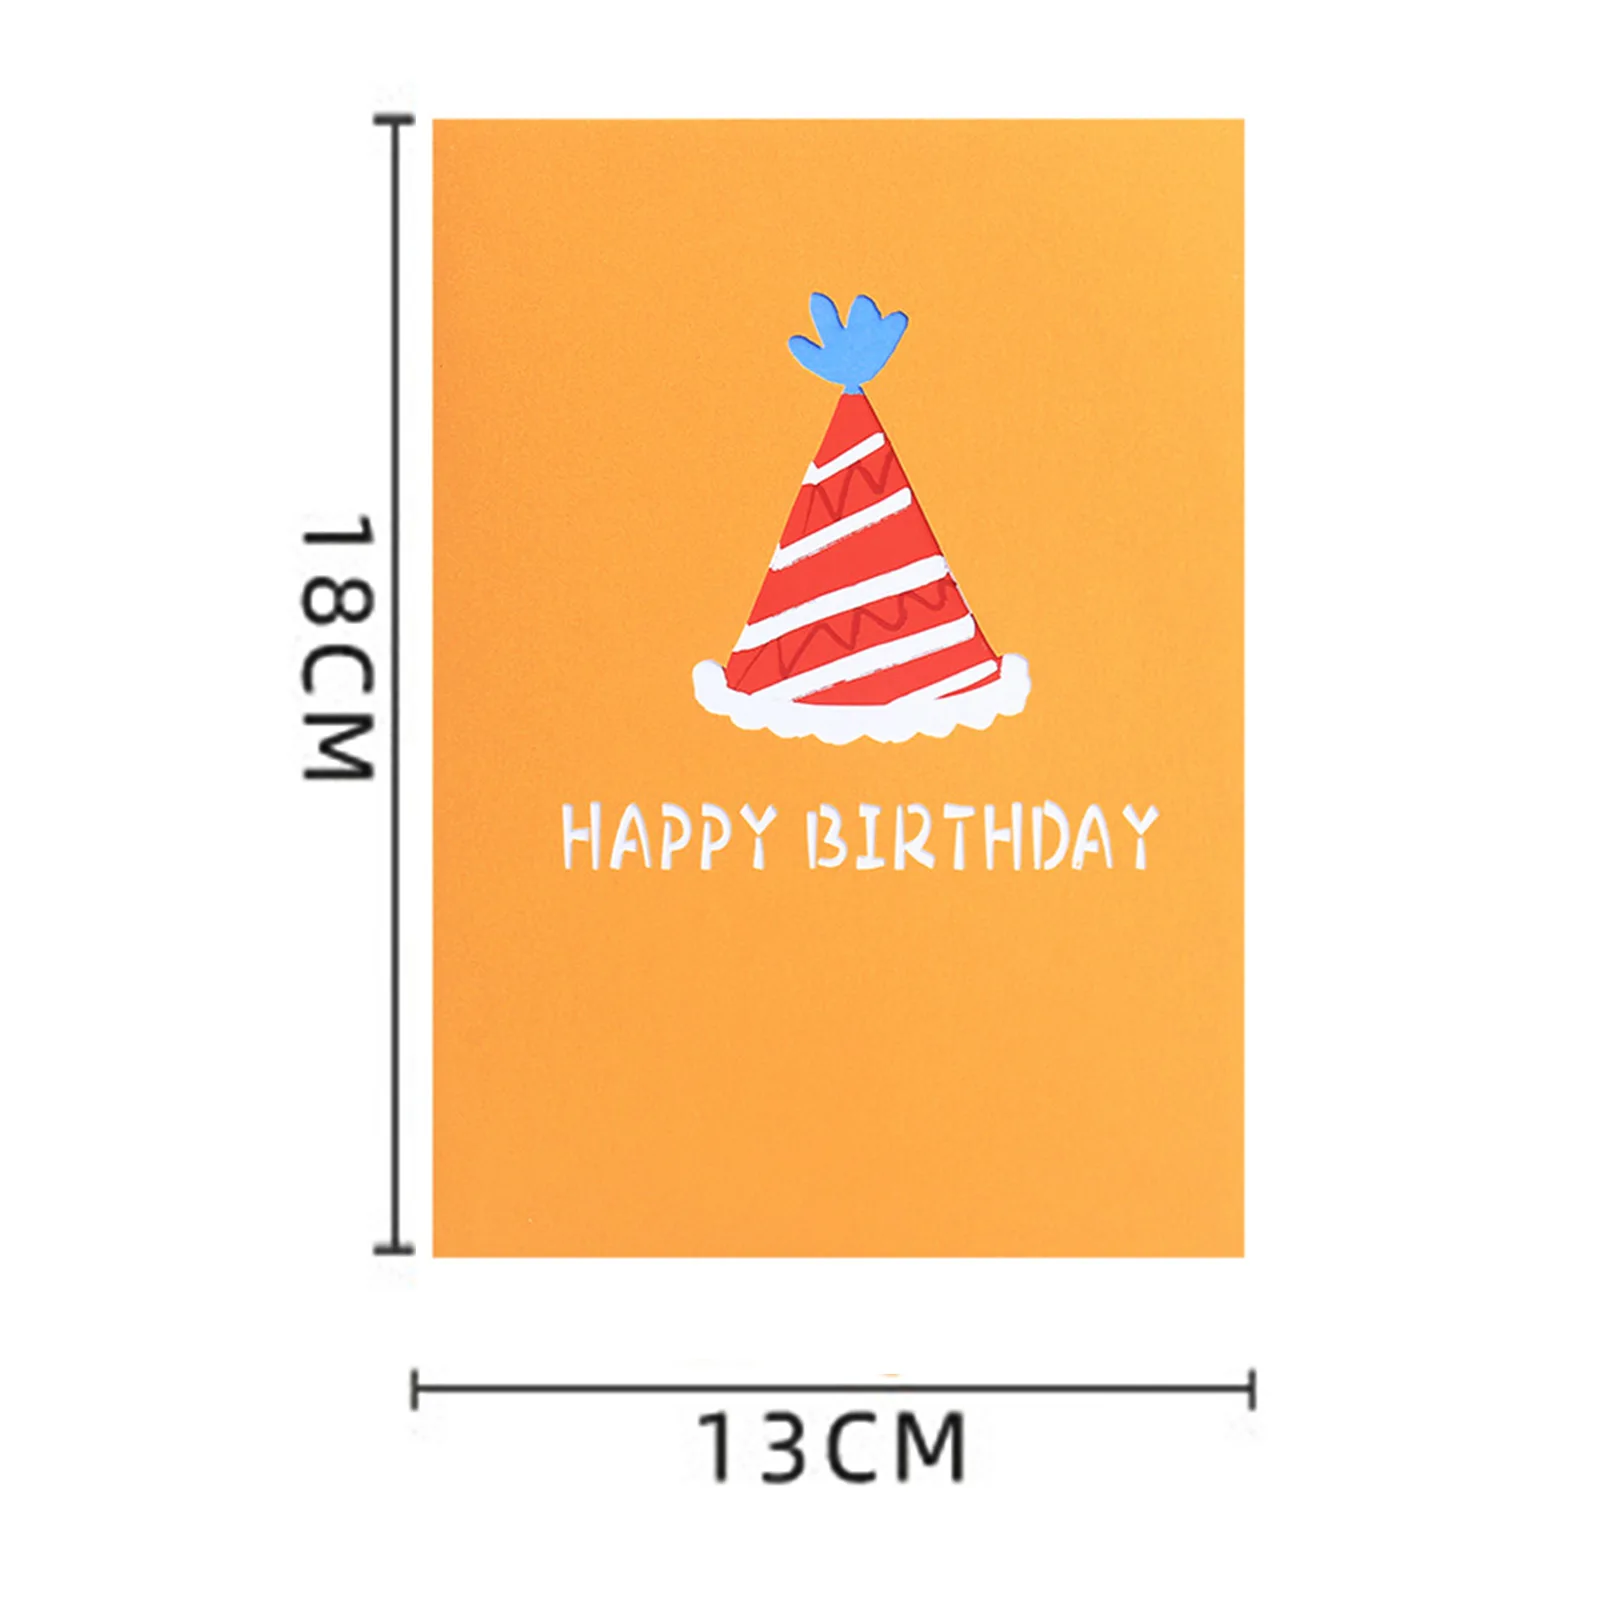 

Envelopes Greeting Cards Unmatched 5x7 Inches Birthday Card Envelope Postcards Environmentally Explosive Laughter